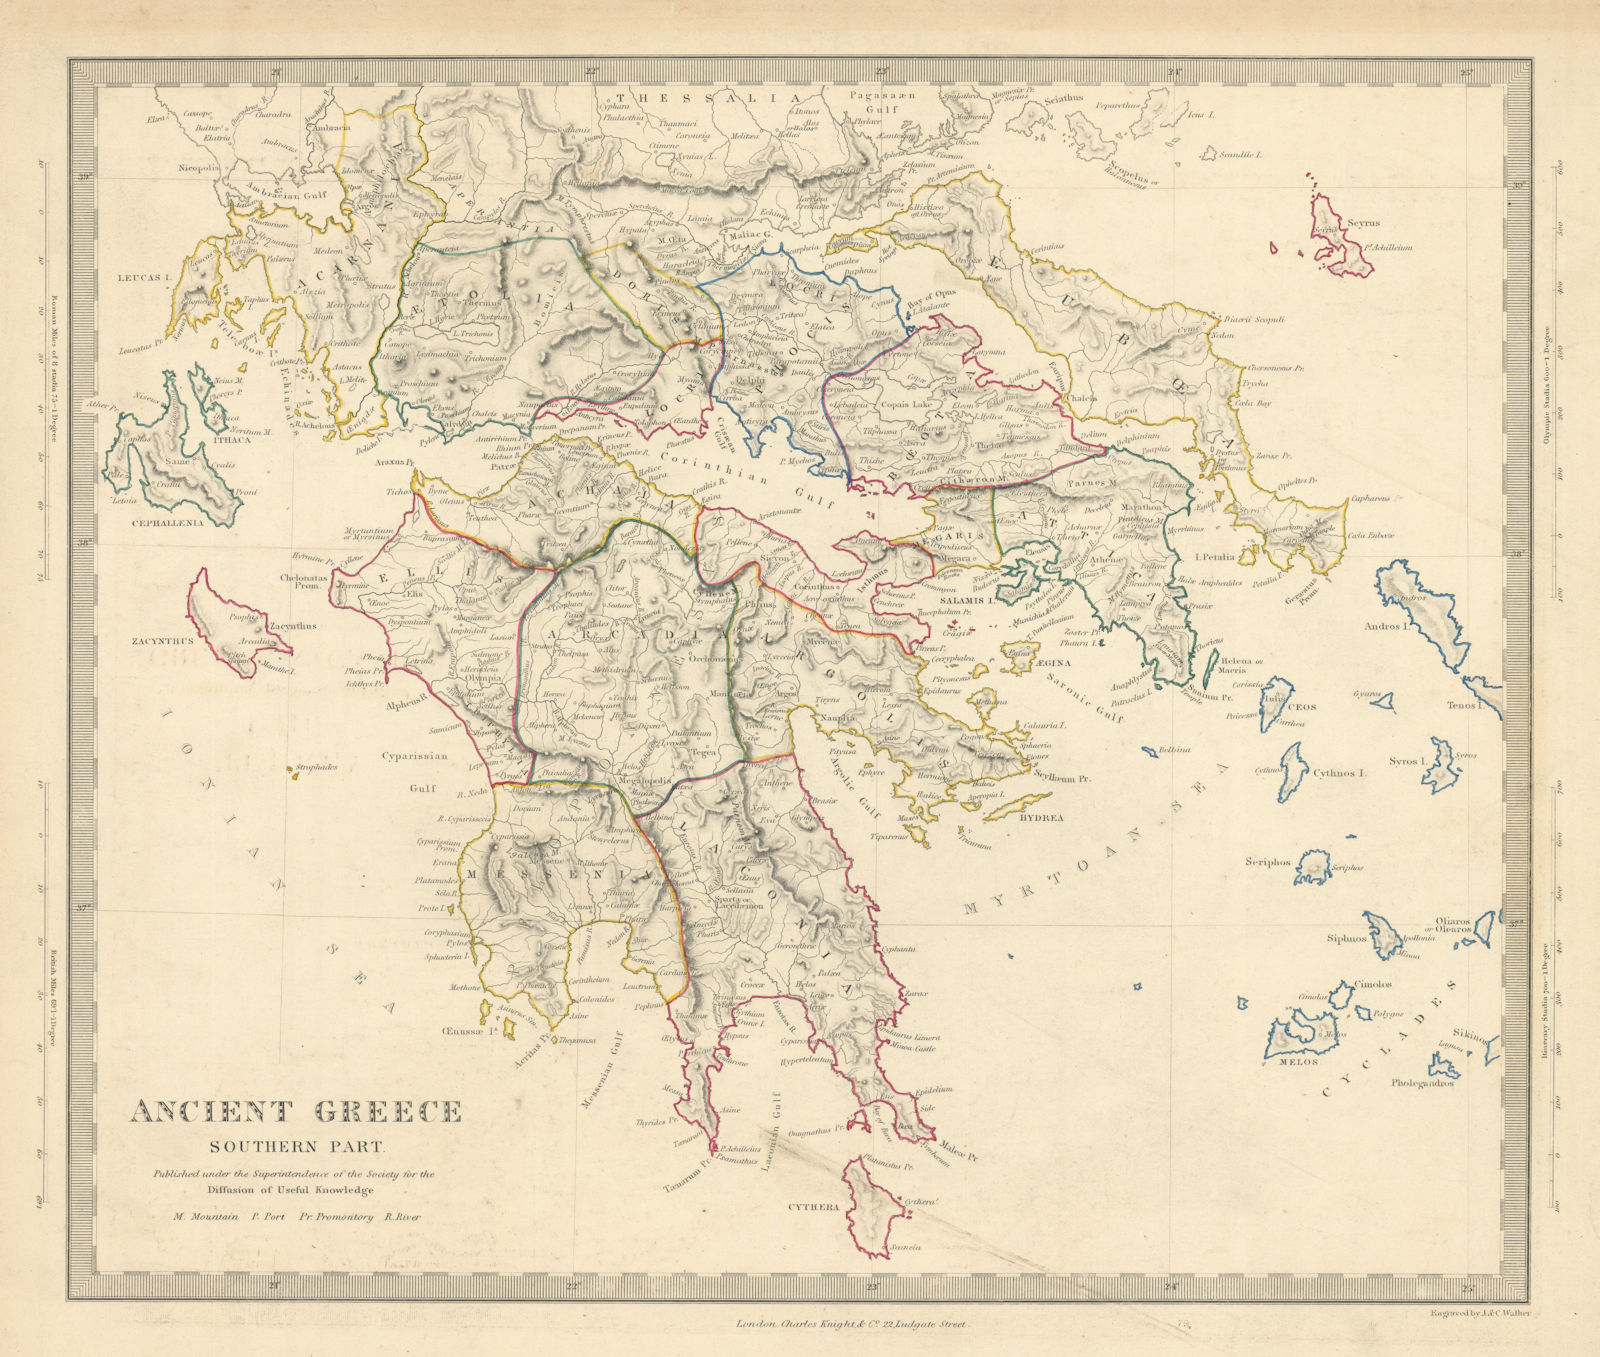 ANCIENT GREECE SOUTH. Peloponnese Attica Athens Cyclades. SDUK 1851 old map